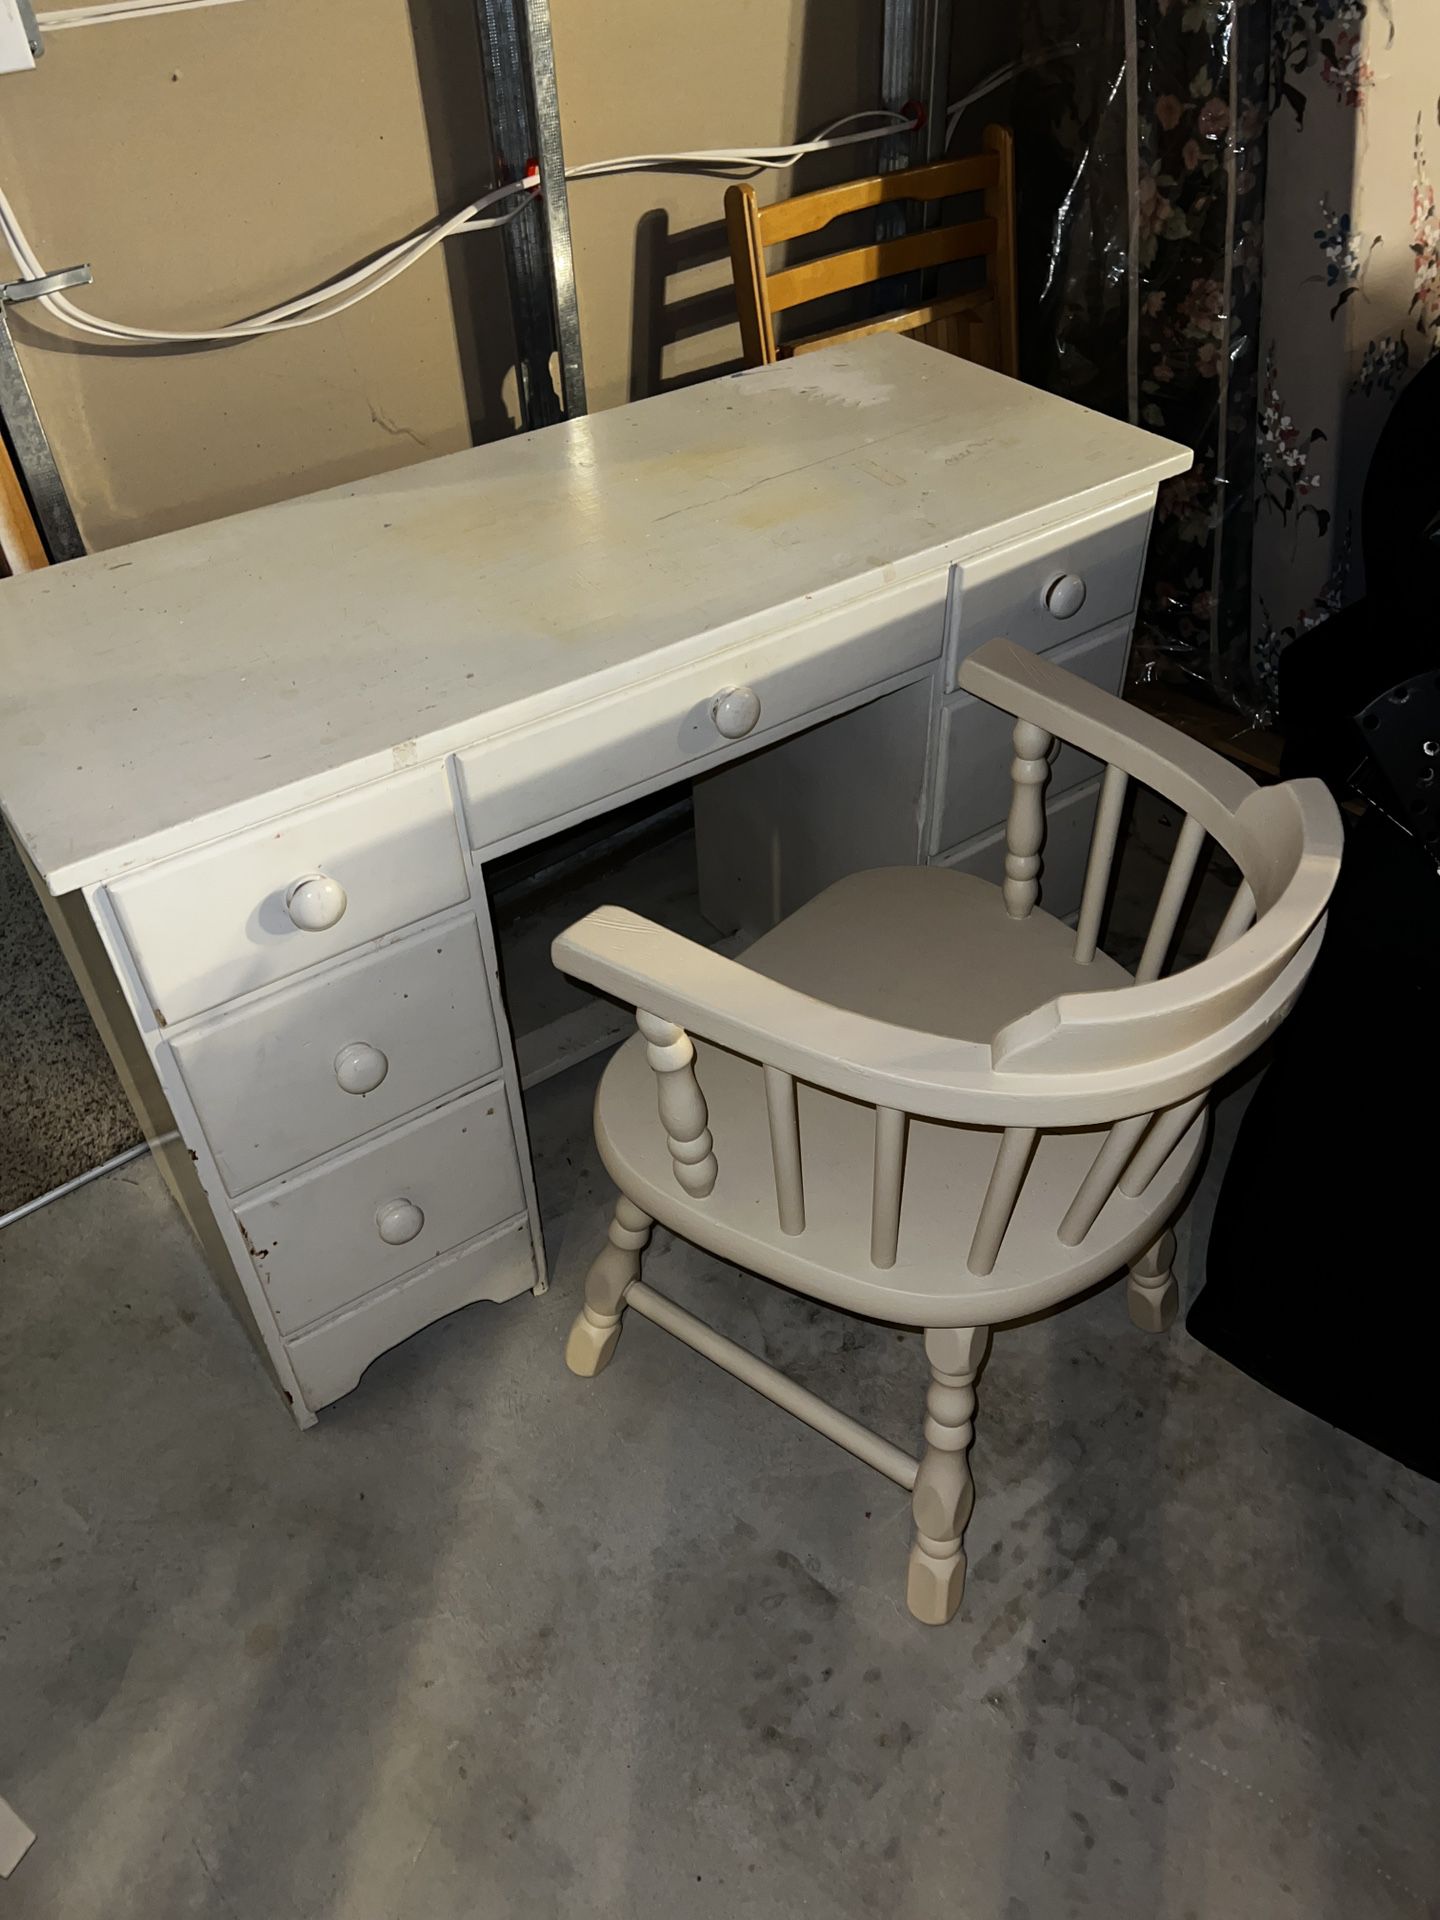 FREE Dresser Desk And Chair 